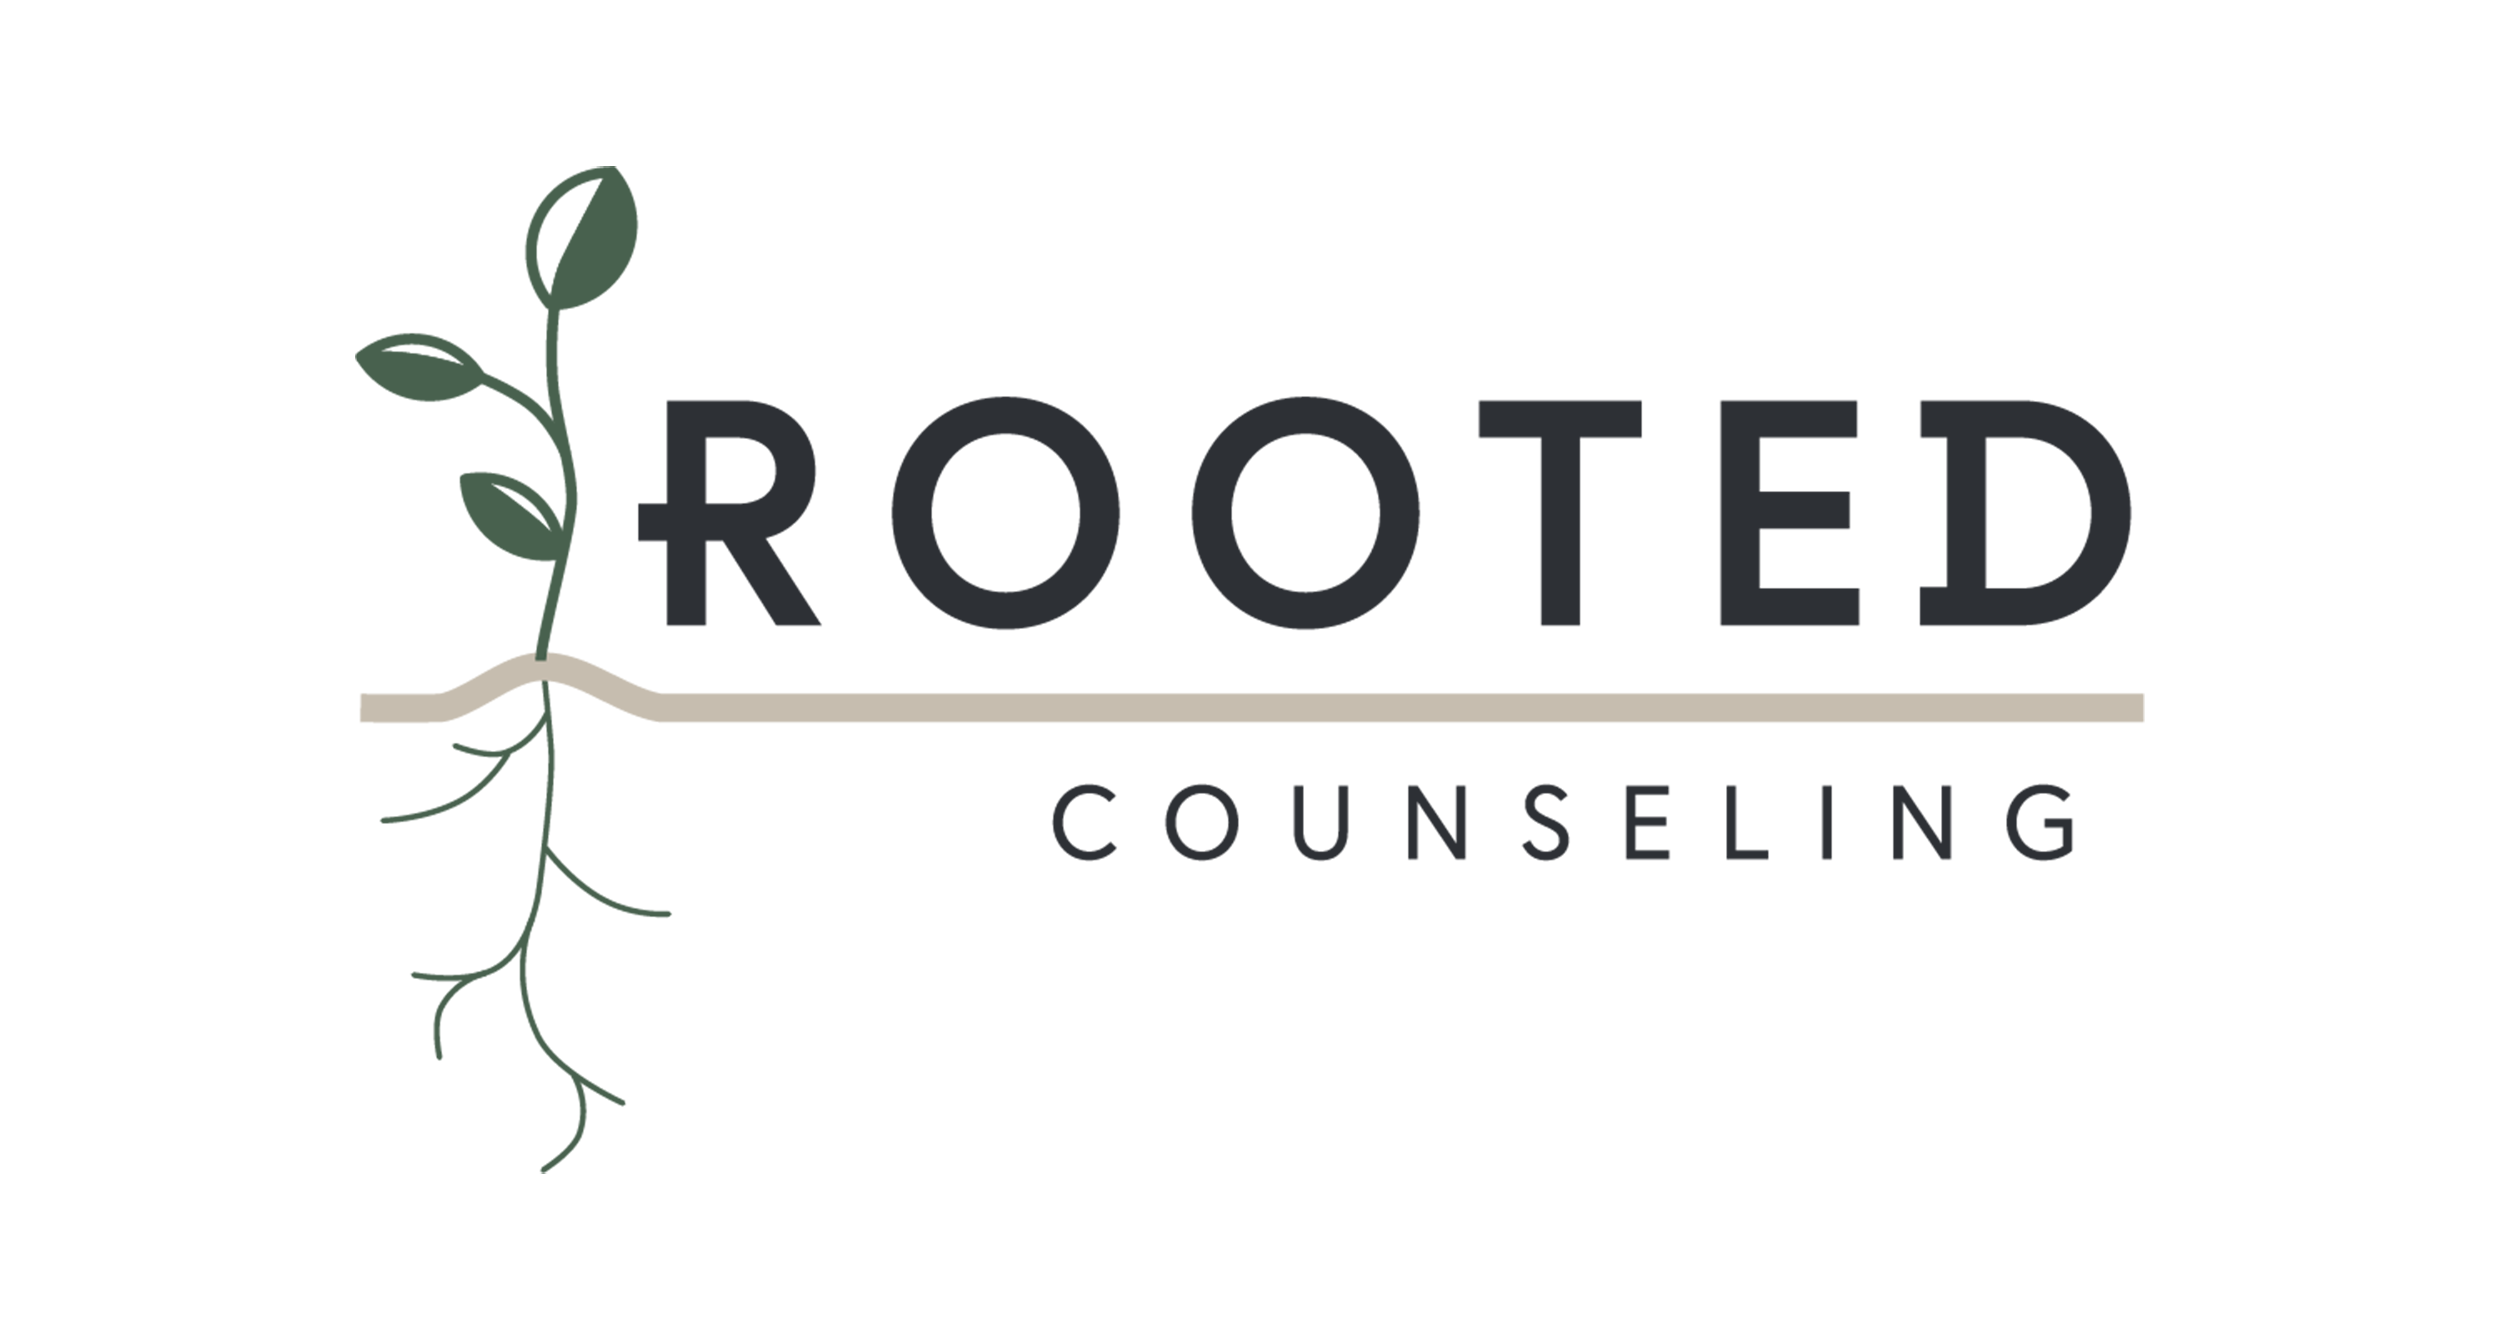 Rooted Counseling- Golden, CO